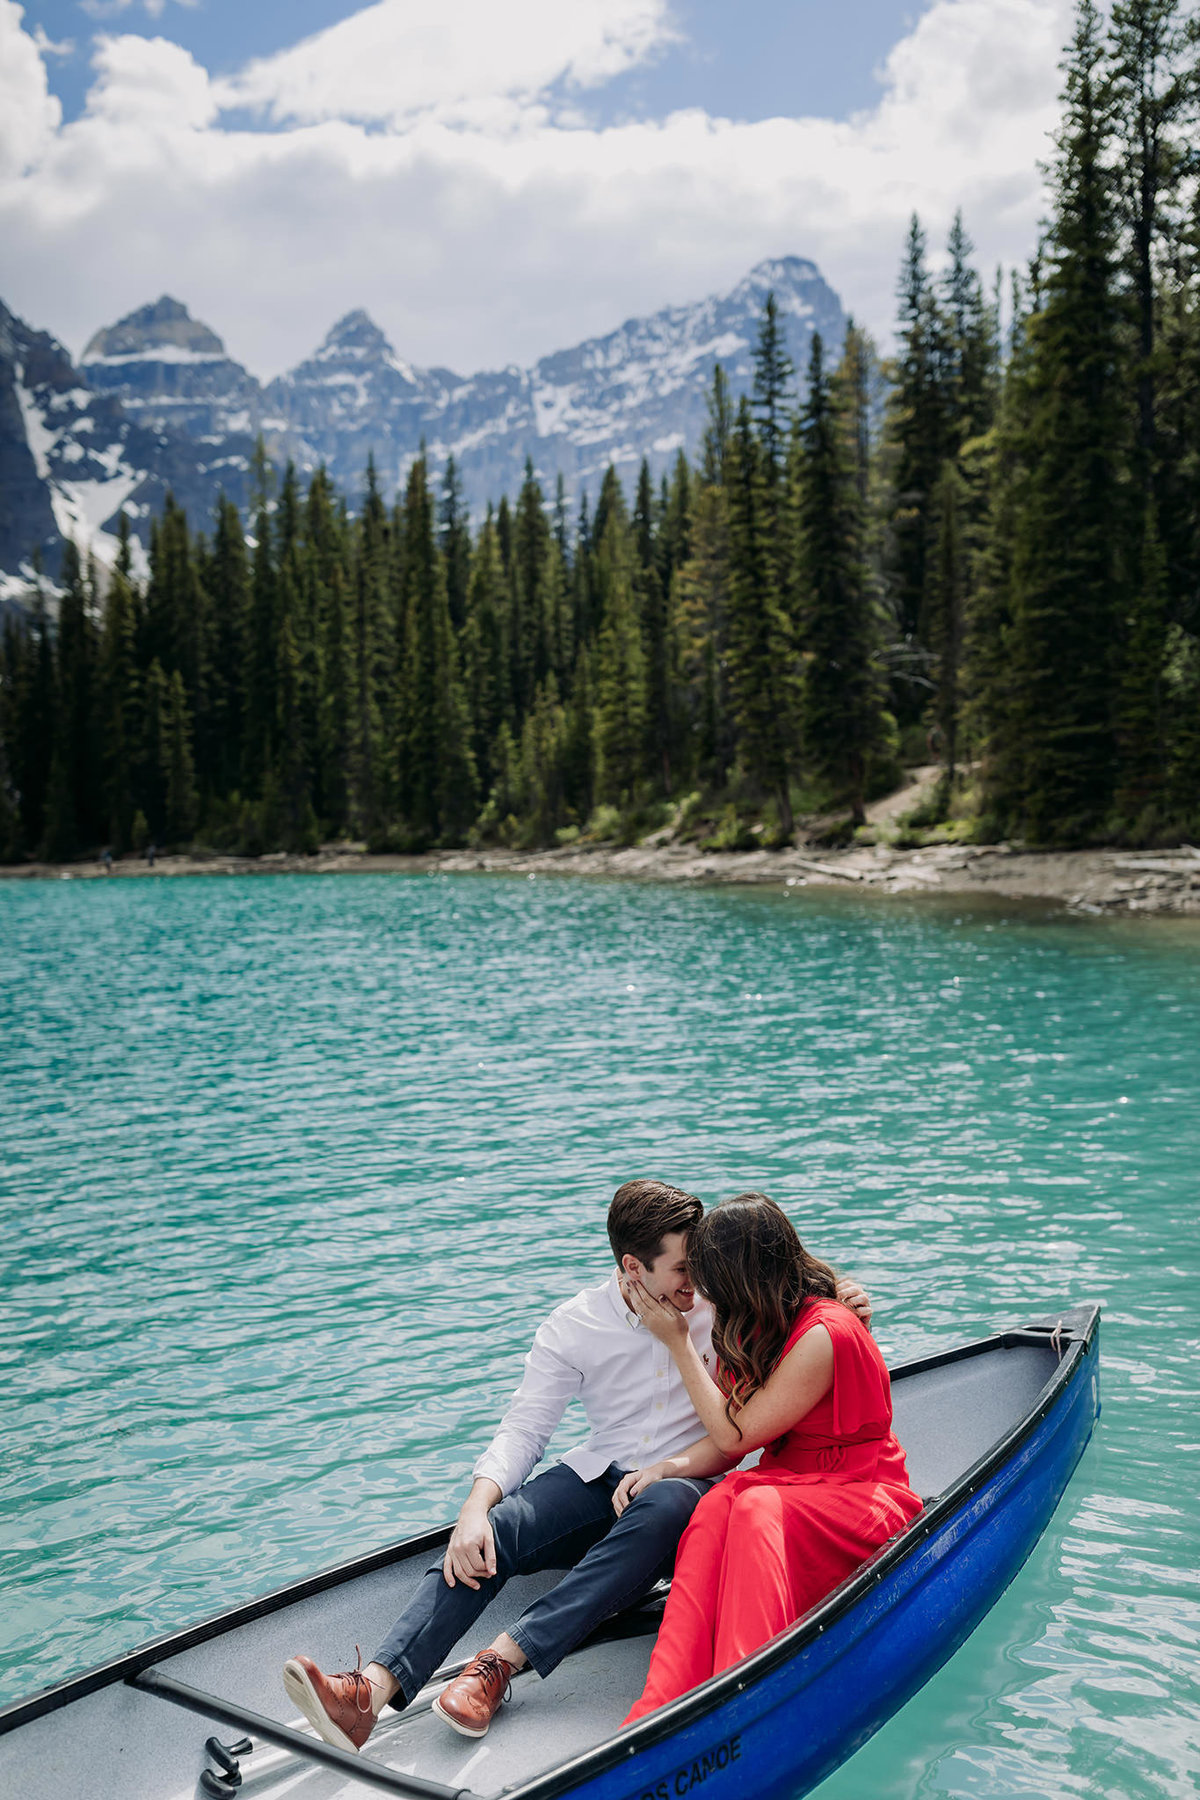 formal engagement photos at moraine lake in blue canoe